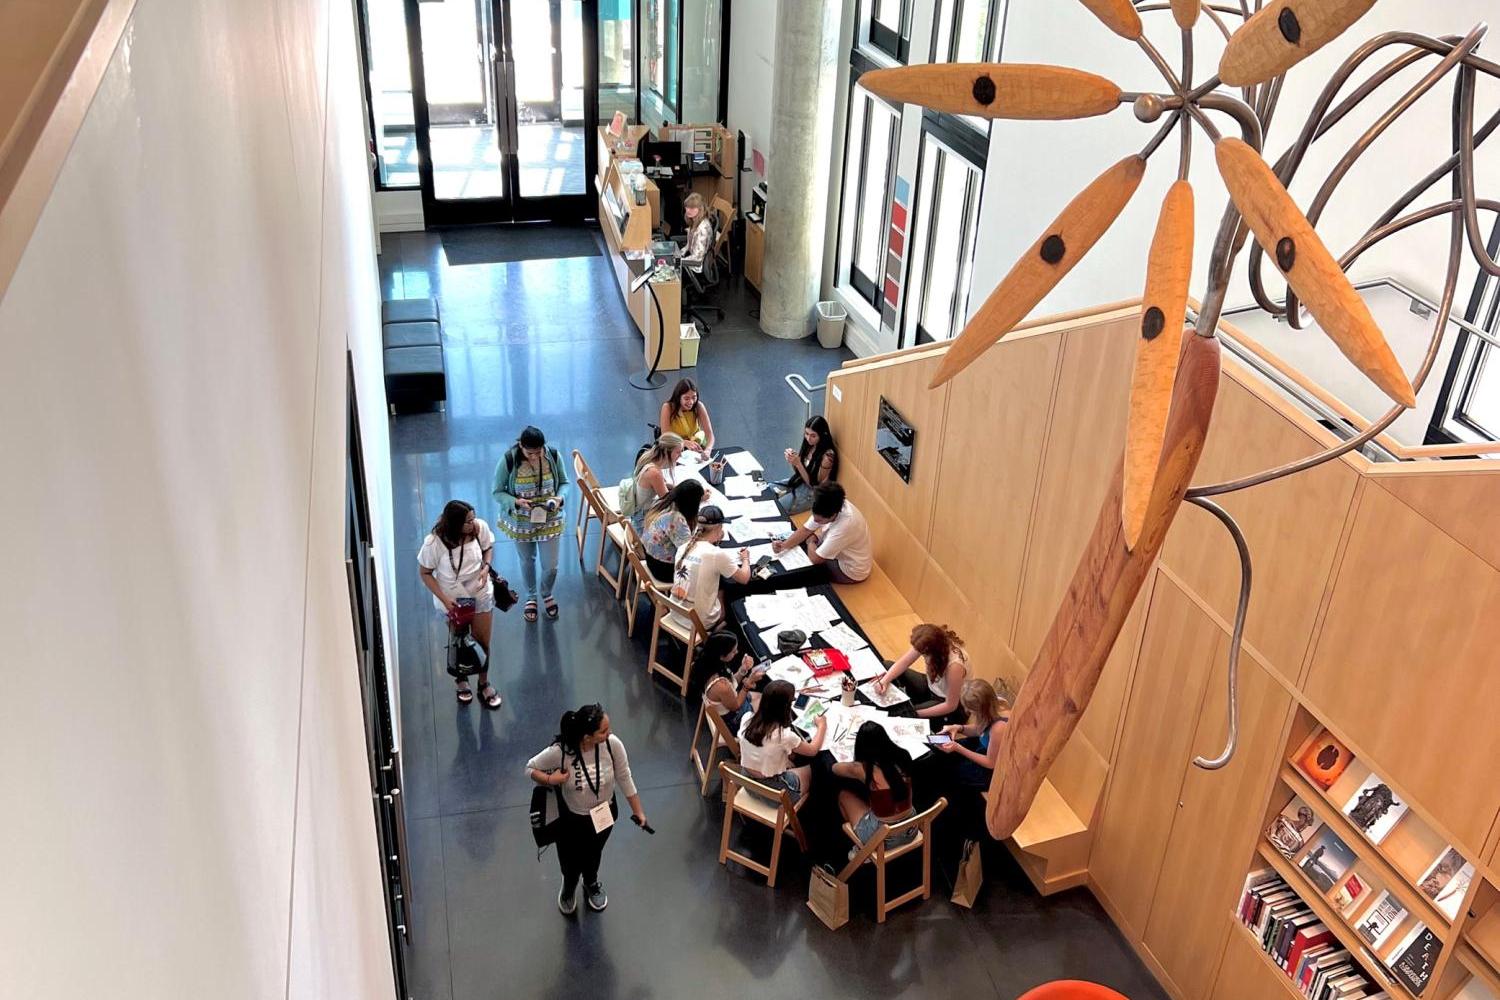 A view from above of the CU Art Museum lobby. There is a long table with a black tablecloth on it at which many people are seated and working on coloring pages together. In the foreground is a large metal and wood sculpture suspended from the ceiling.